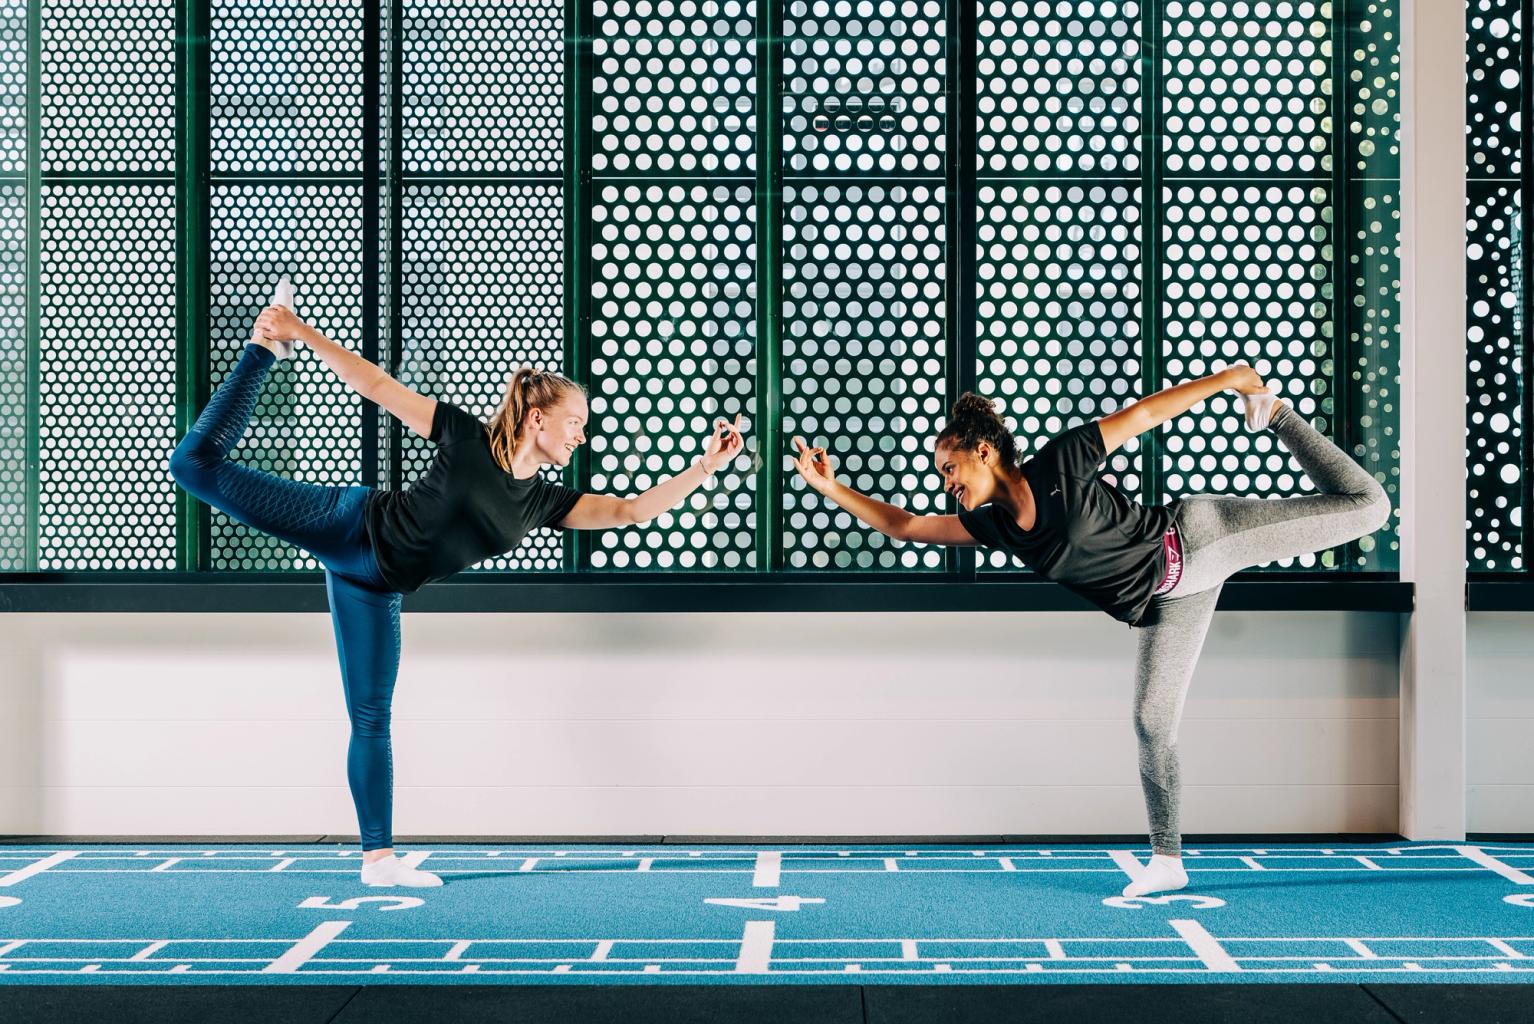  Two women face each other while balancing on one foot. They are at a fitness center, dressed in workout attire.